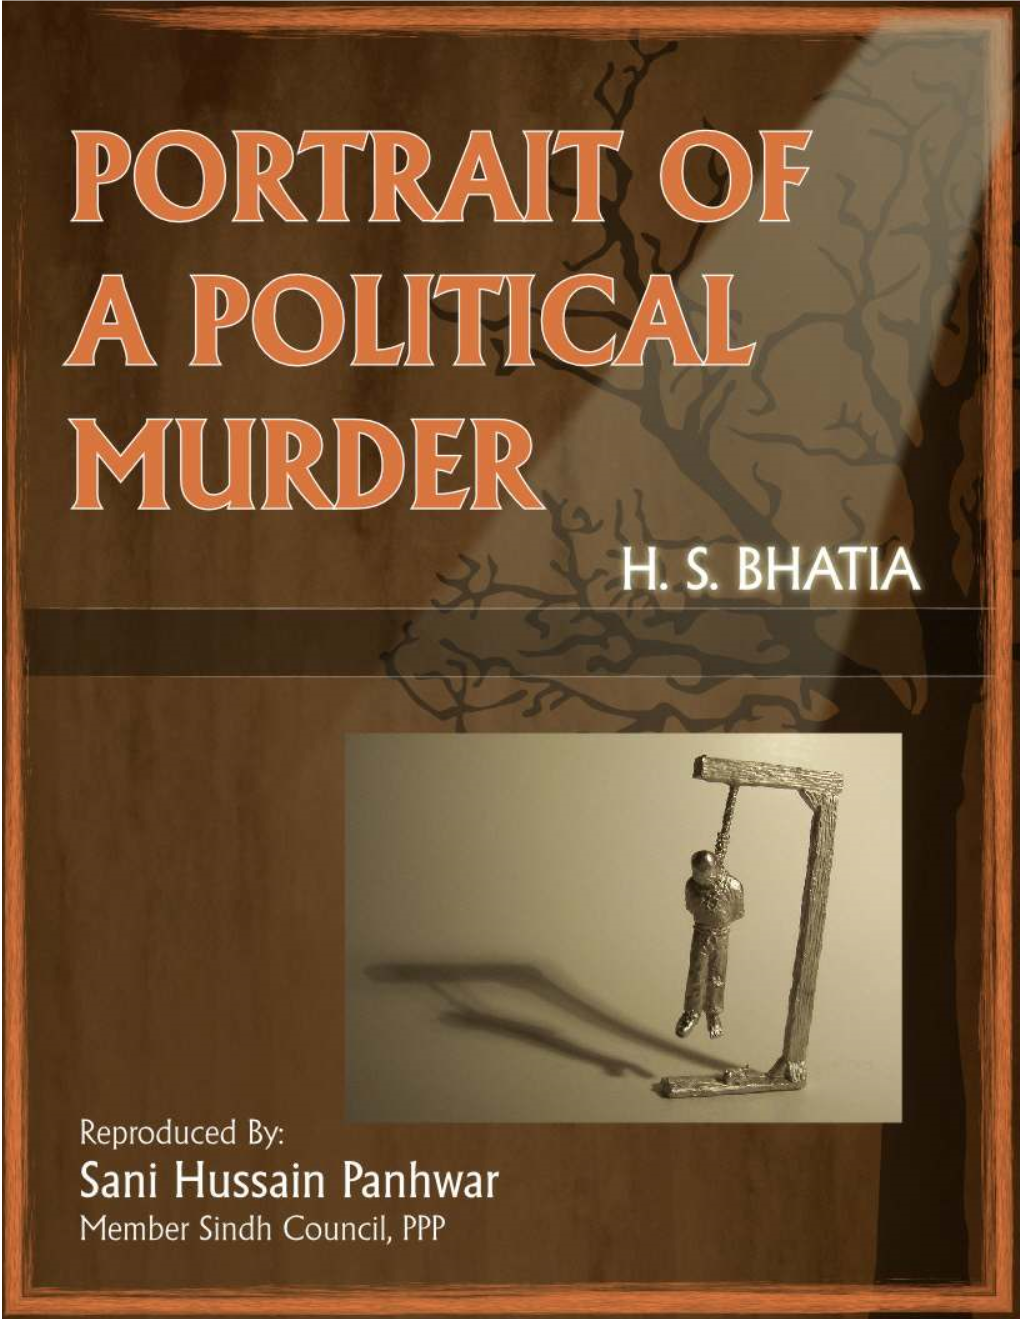 Portrait of a a Political Murder by H S Bhatia